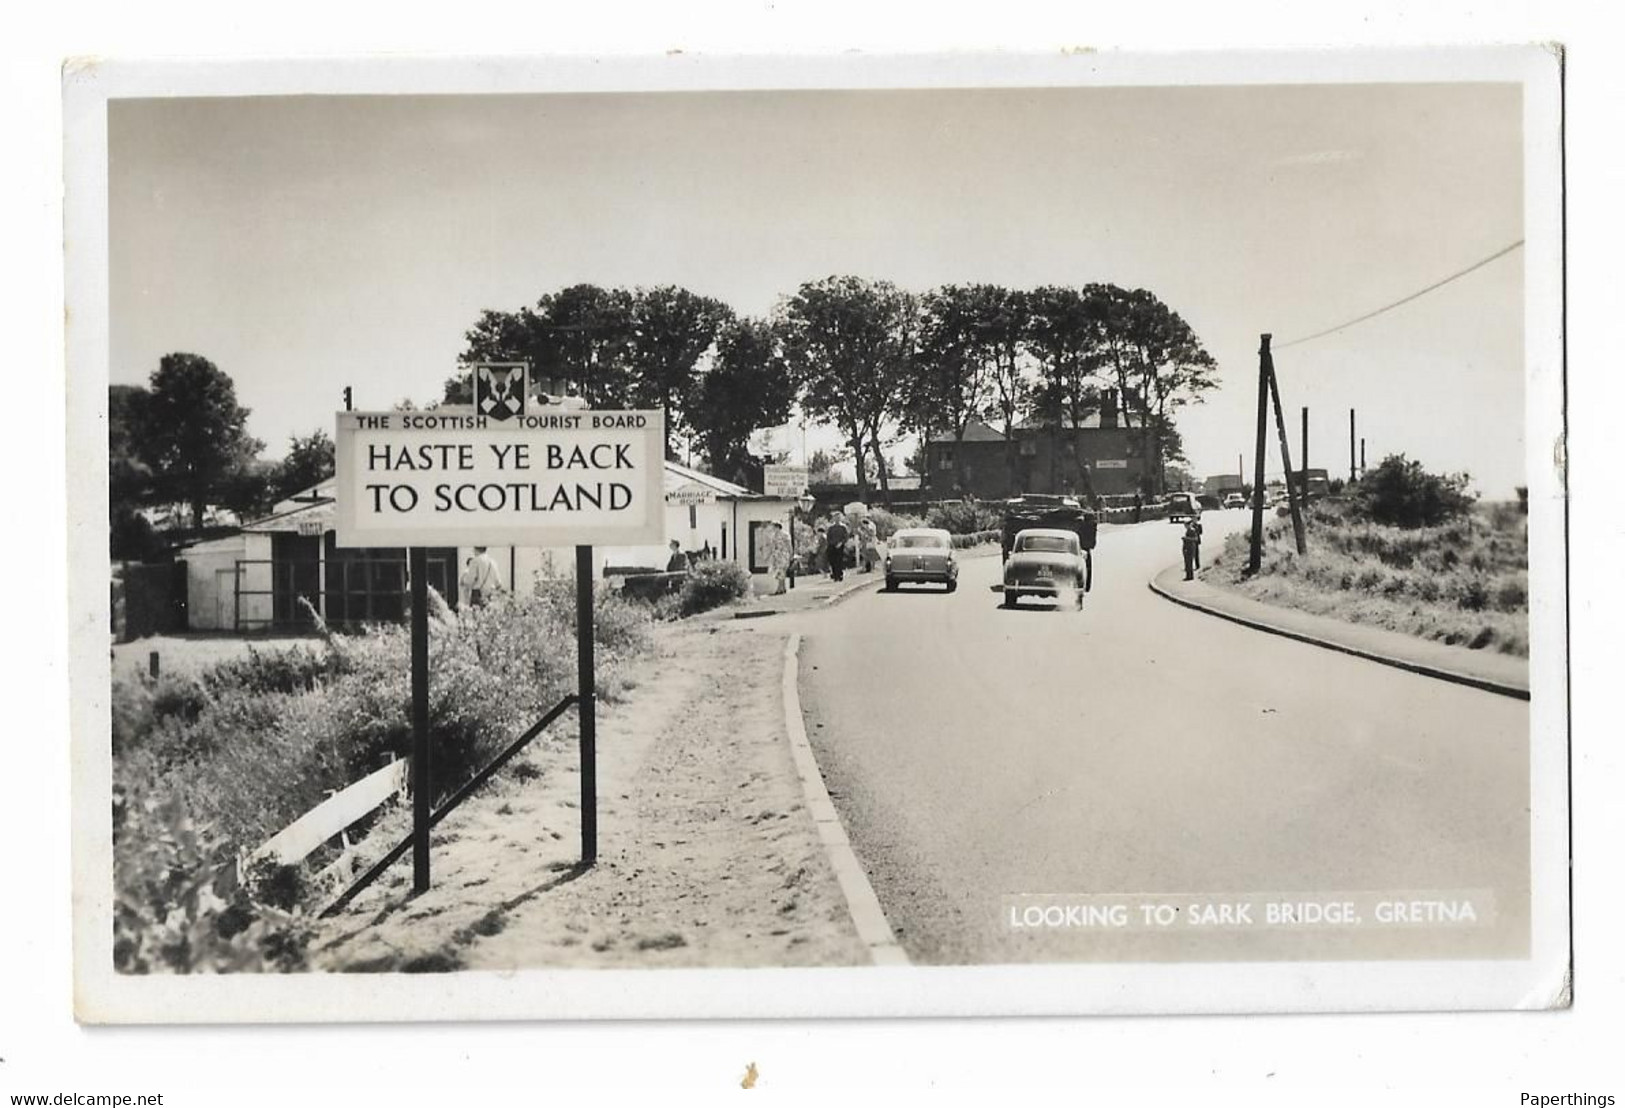 Real Photo Postcard, Scotland, Dumfries And Galloway, Gretna Looking To Sark Bridge, Cars, Road, House. - Dumfriesshire